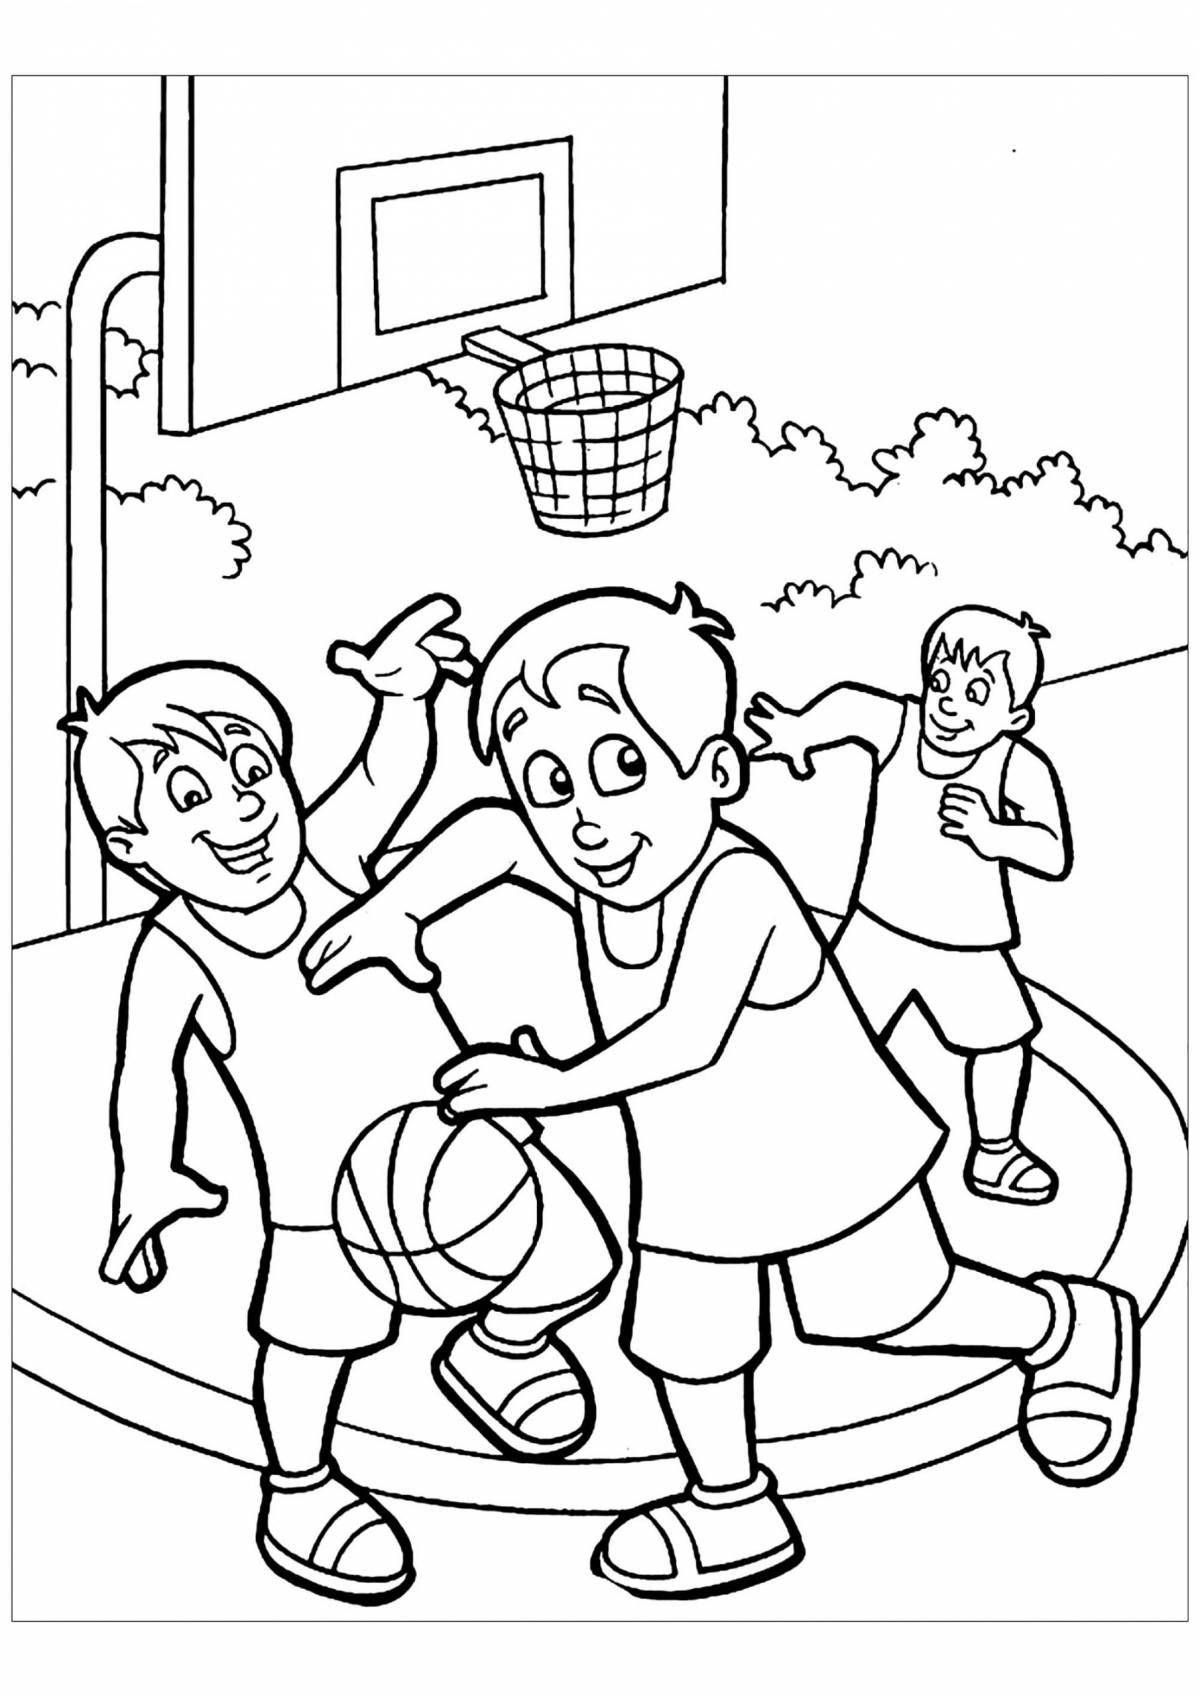 Exciting PE coloring book